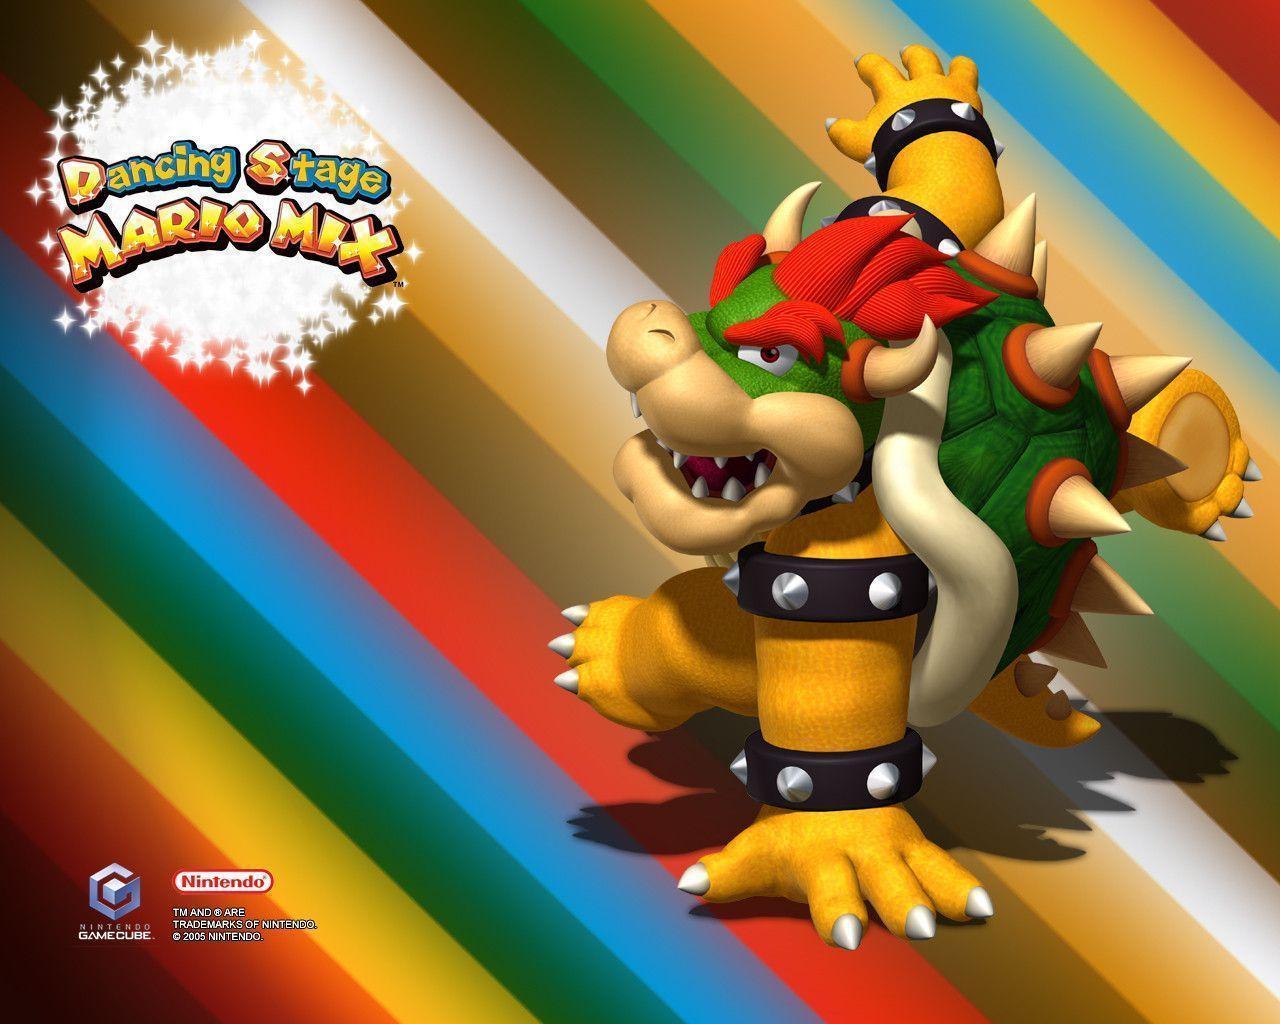 Bowser Wallpapers High Definition Res 1024x768PX ~ Wallpapers Bowser